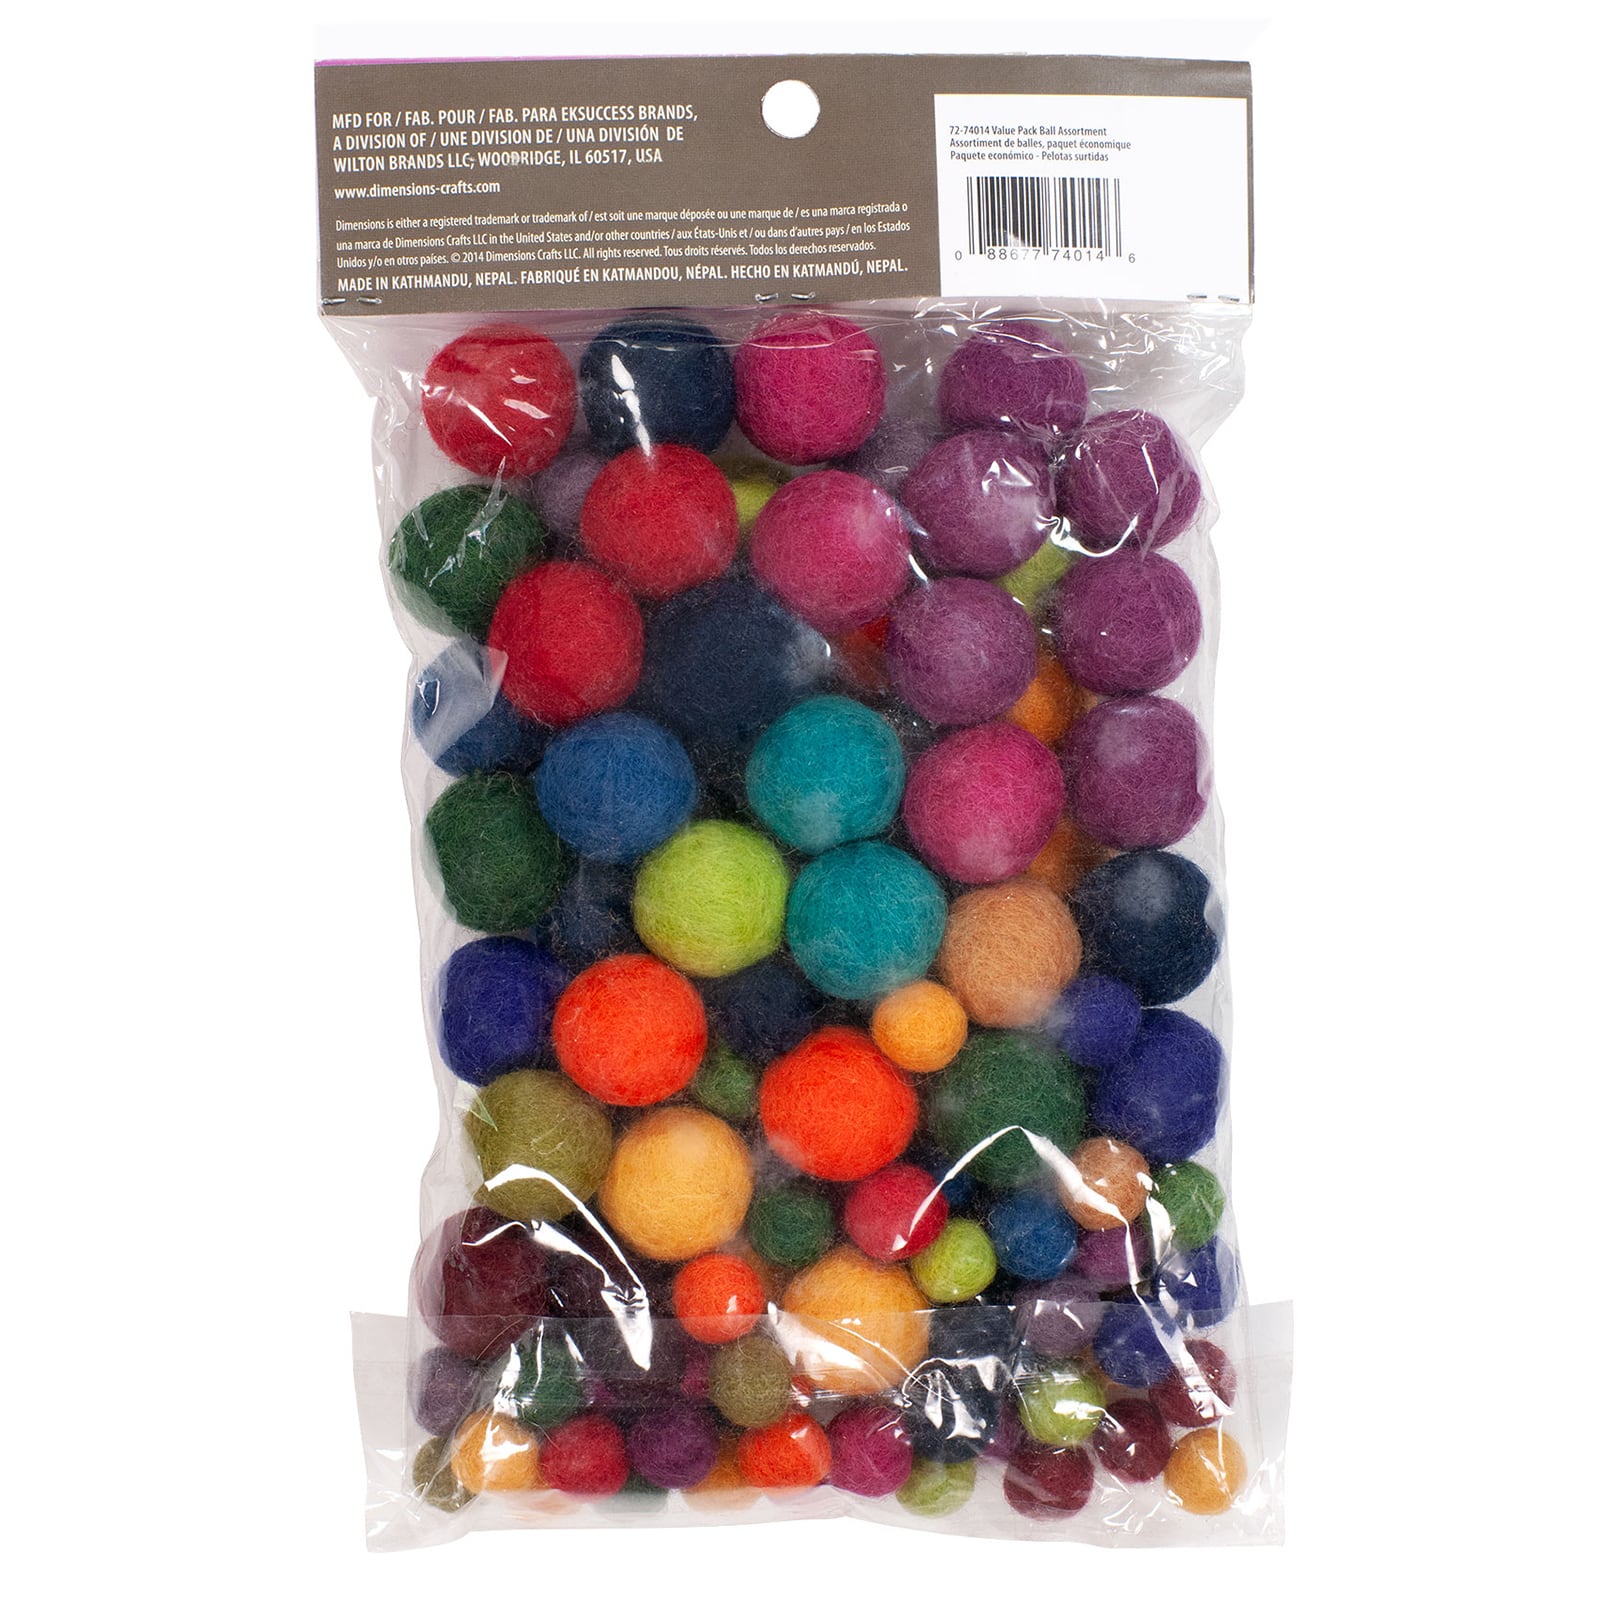 Dimensions® Ball Value Pack